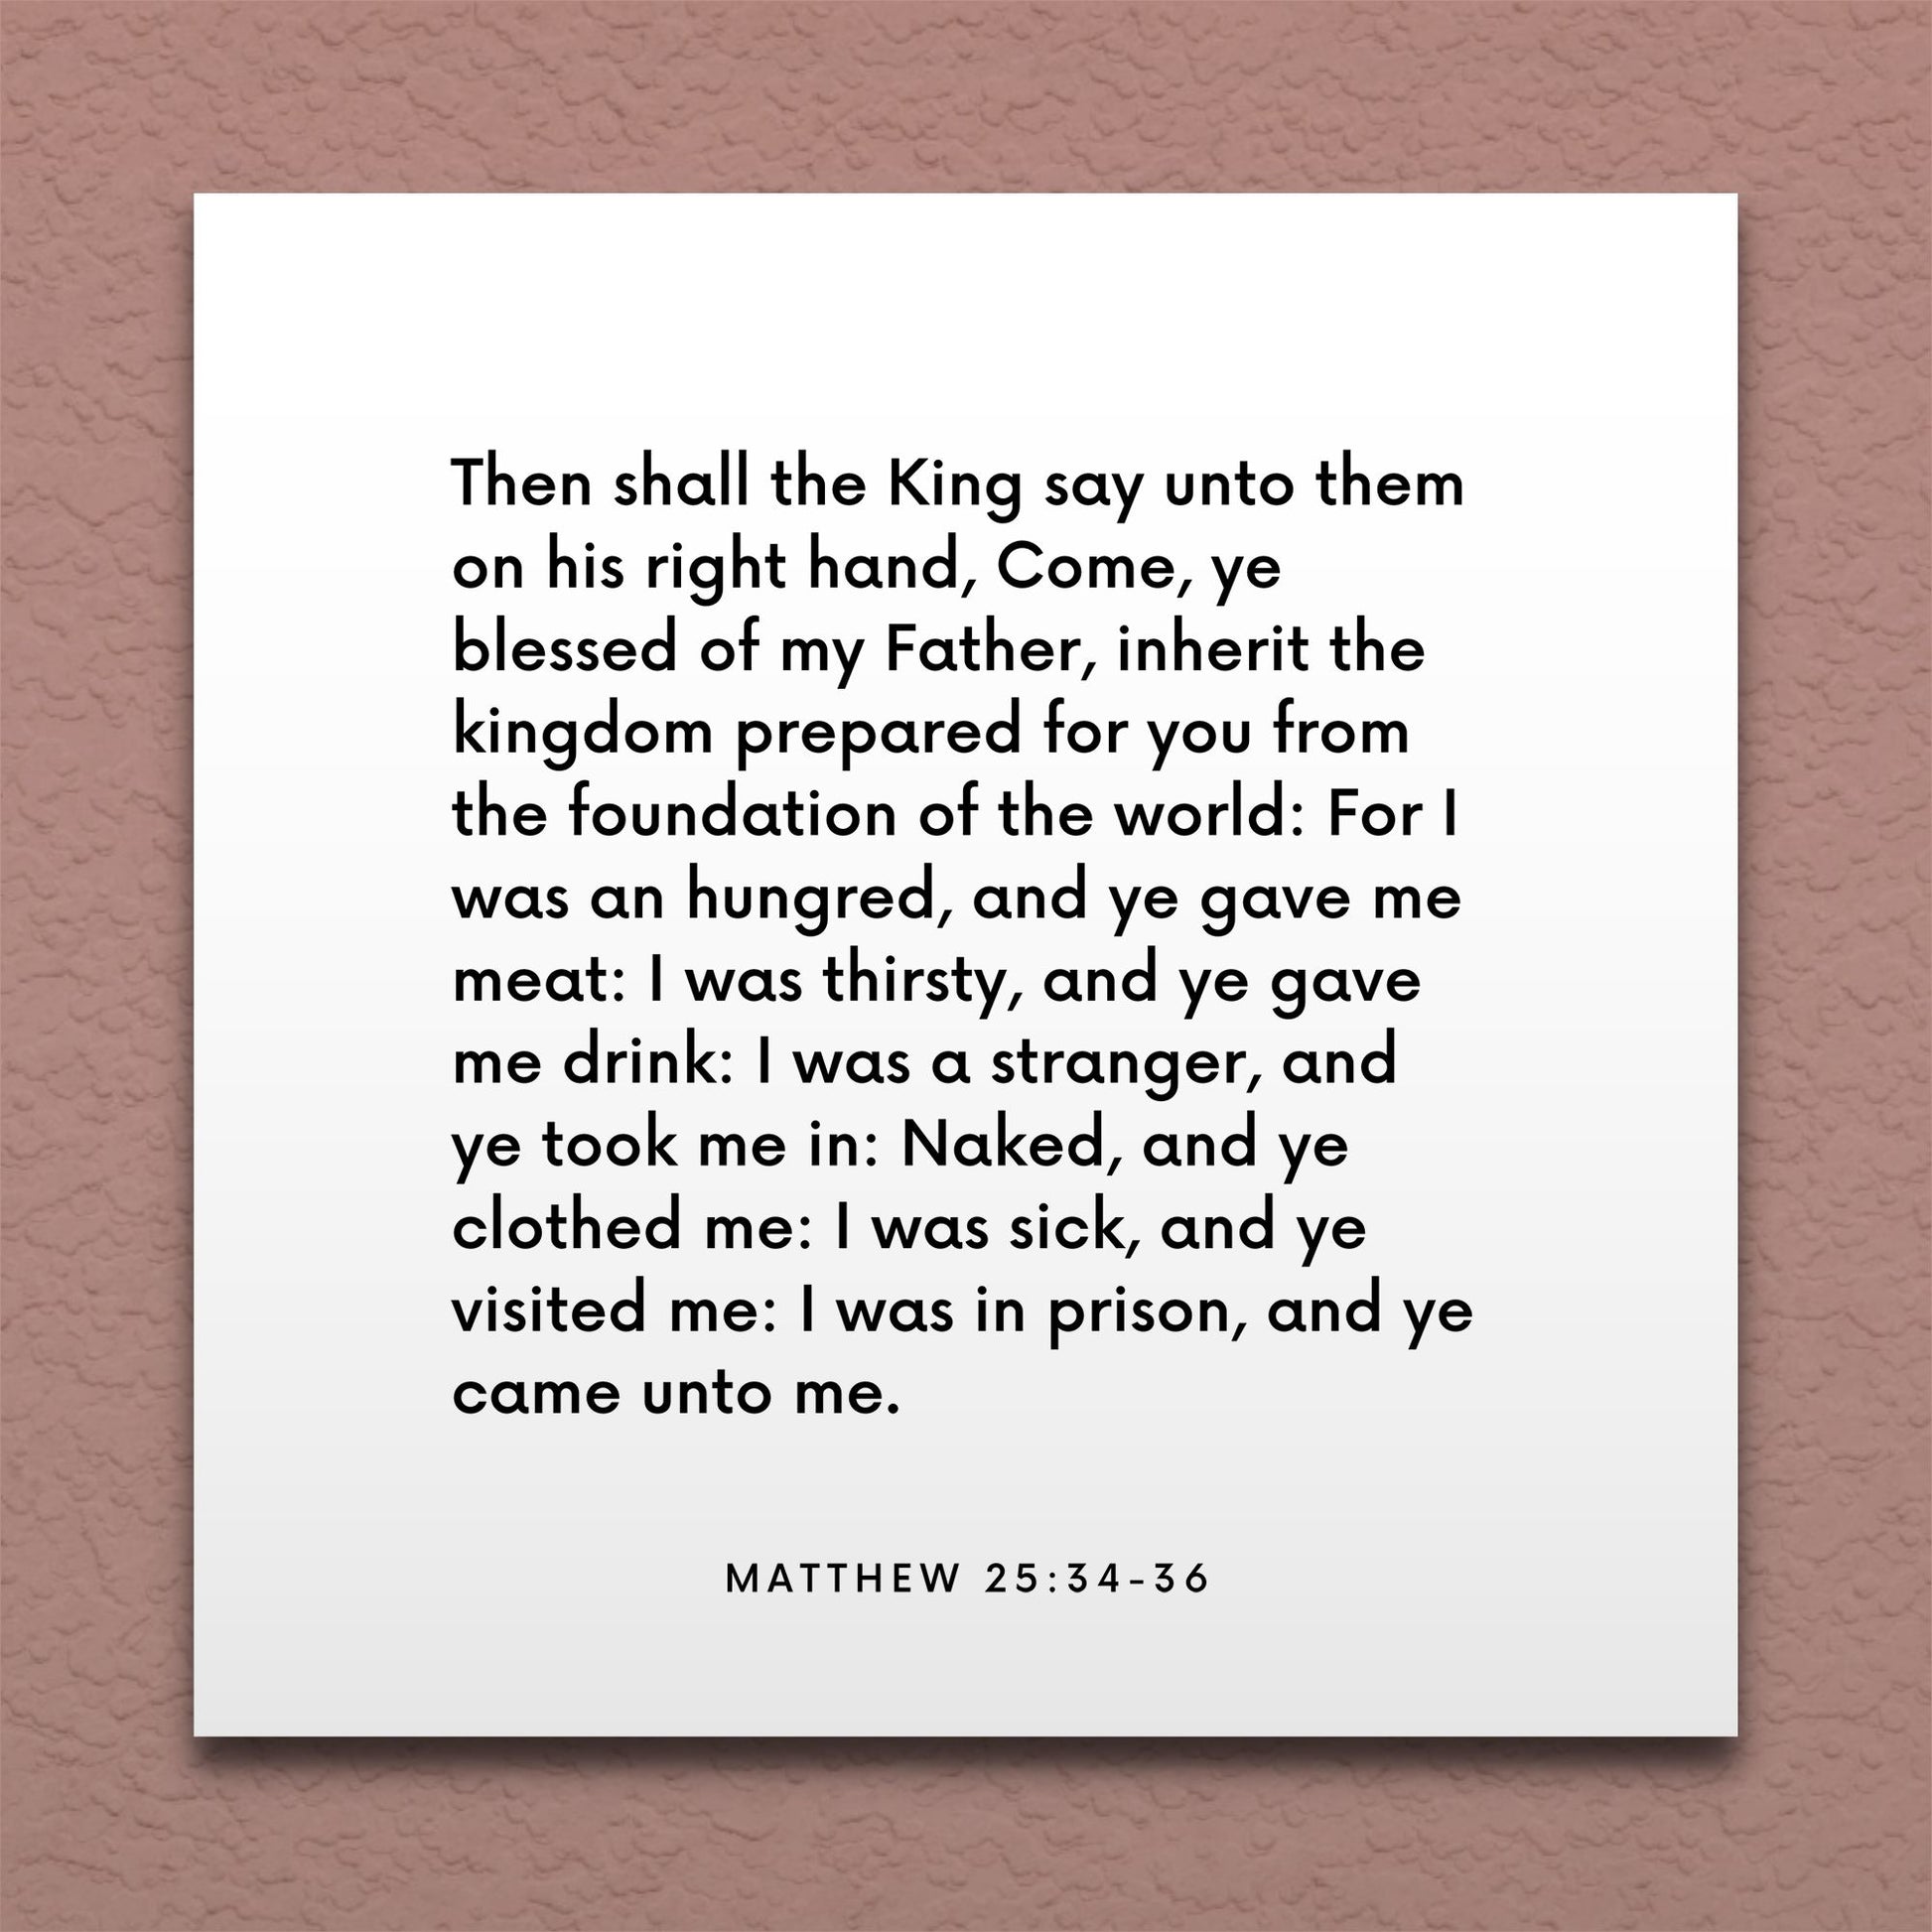 Wall-mounted scripture tile for Matthew 25:34-36 - "Come, ye blessed of my Father, inherit the kingdom"